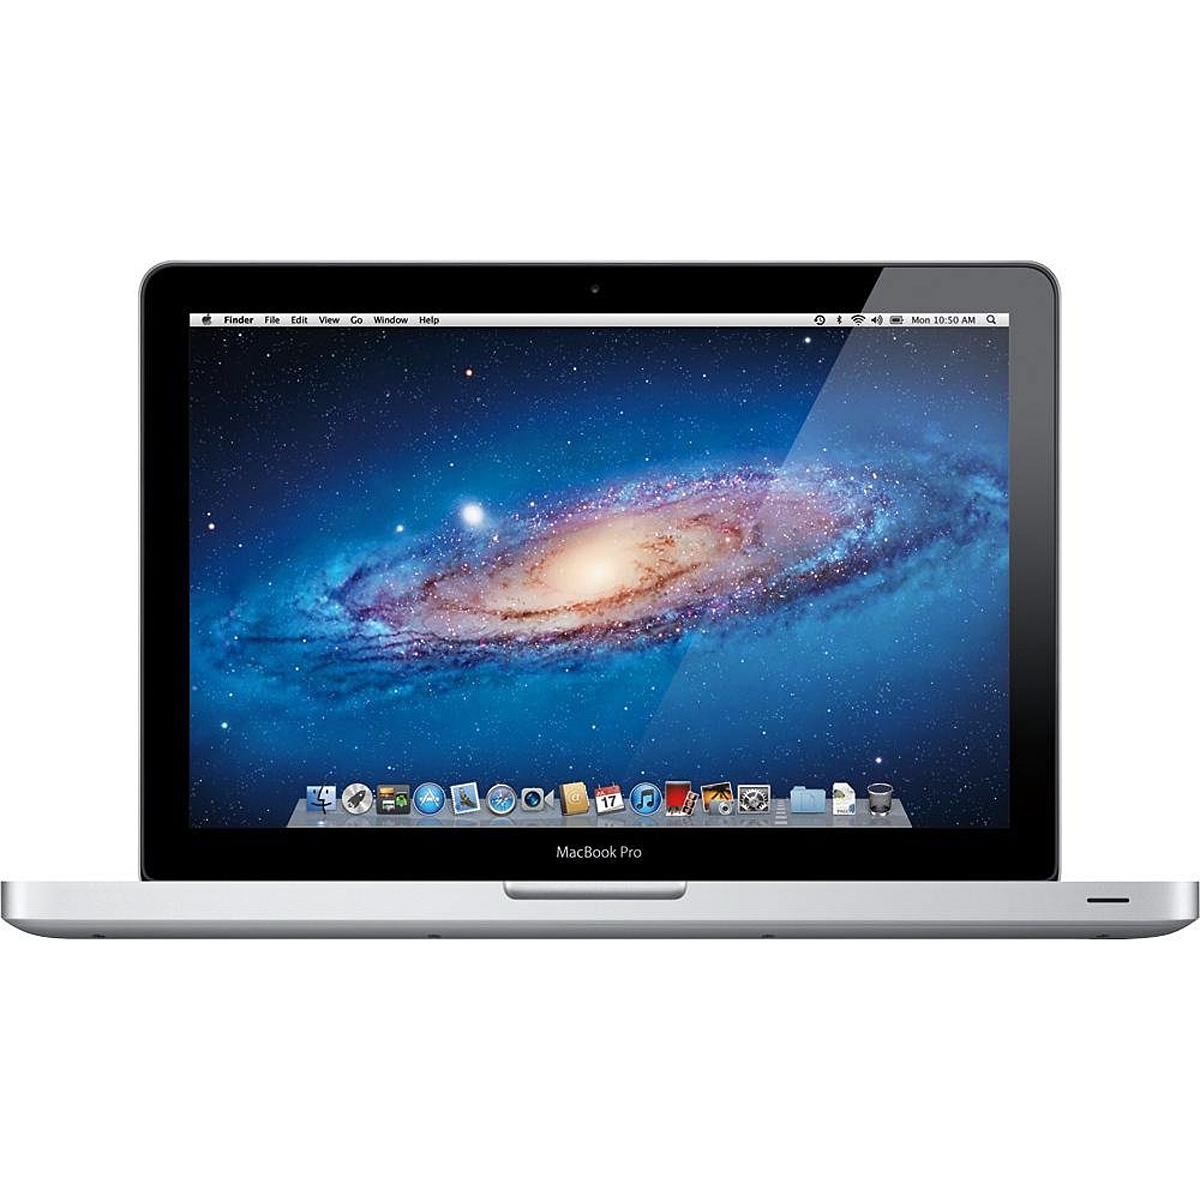 Open Box Apple MacBook Pro Laptop 13.3-inch Display, 8GB RAM, 500GB HDD, Intel Core i7 2.9GHz, Mac OS, MD102LL/A (Non-Retail Packaging) - image 1 of 7